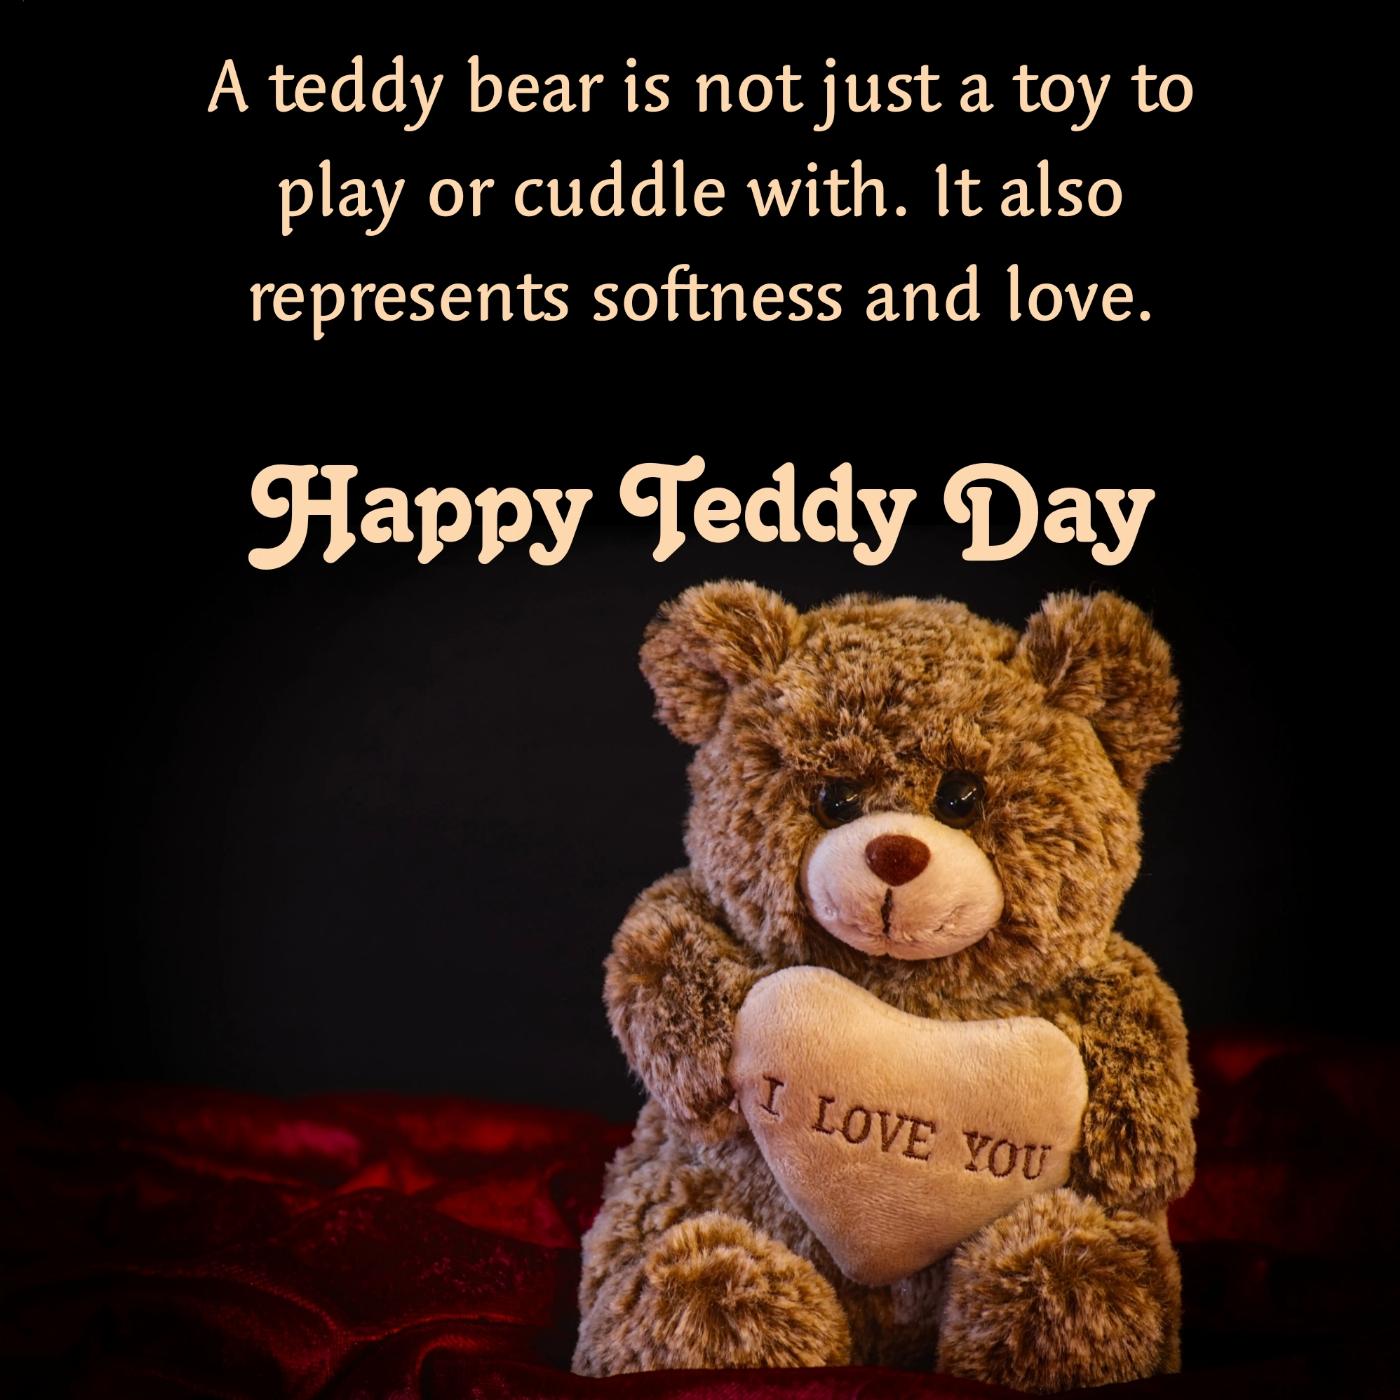 A teddy bear is not just a toy to play or cuddle with